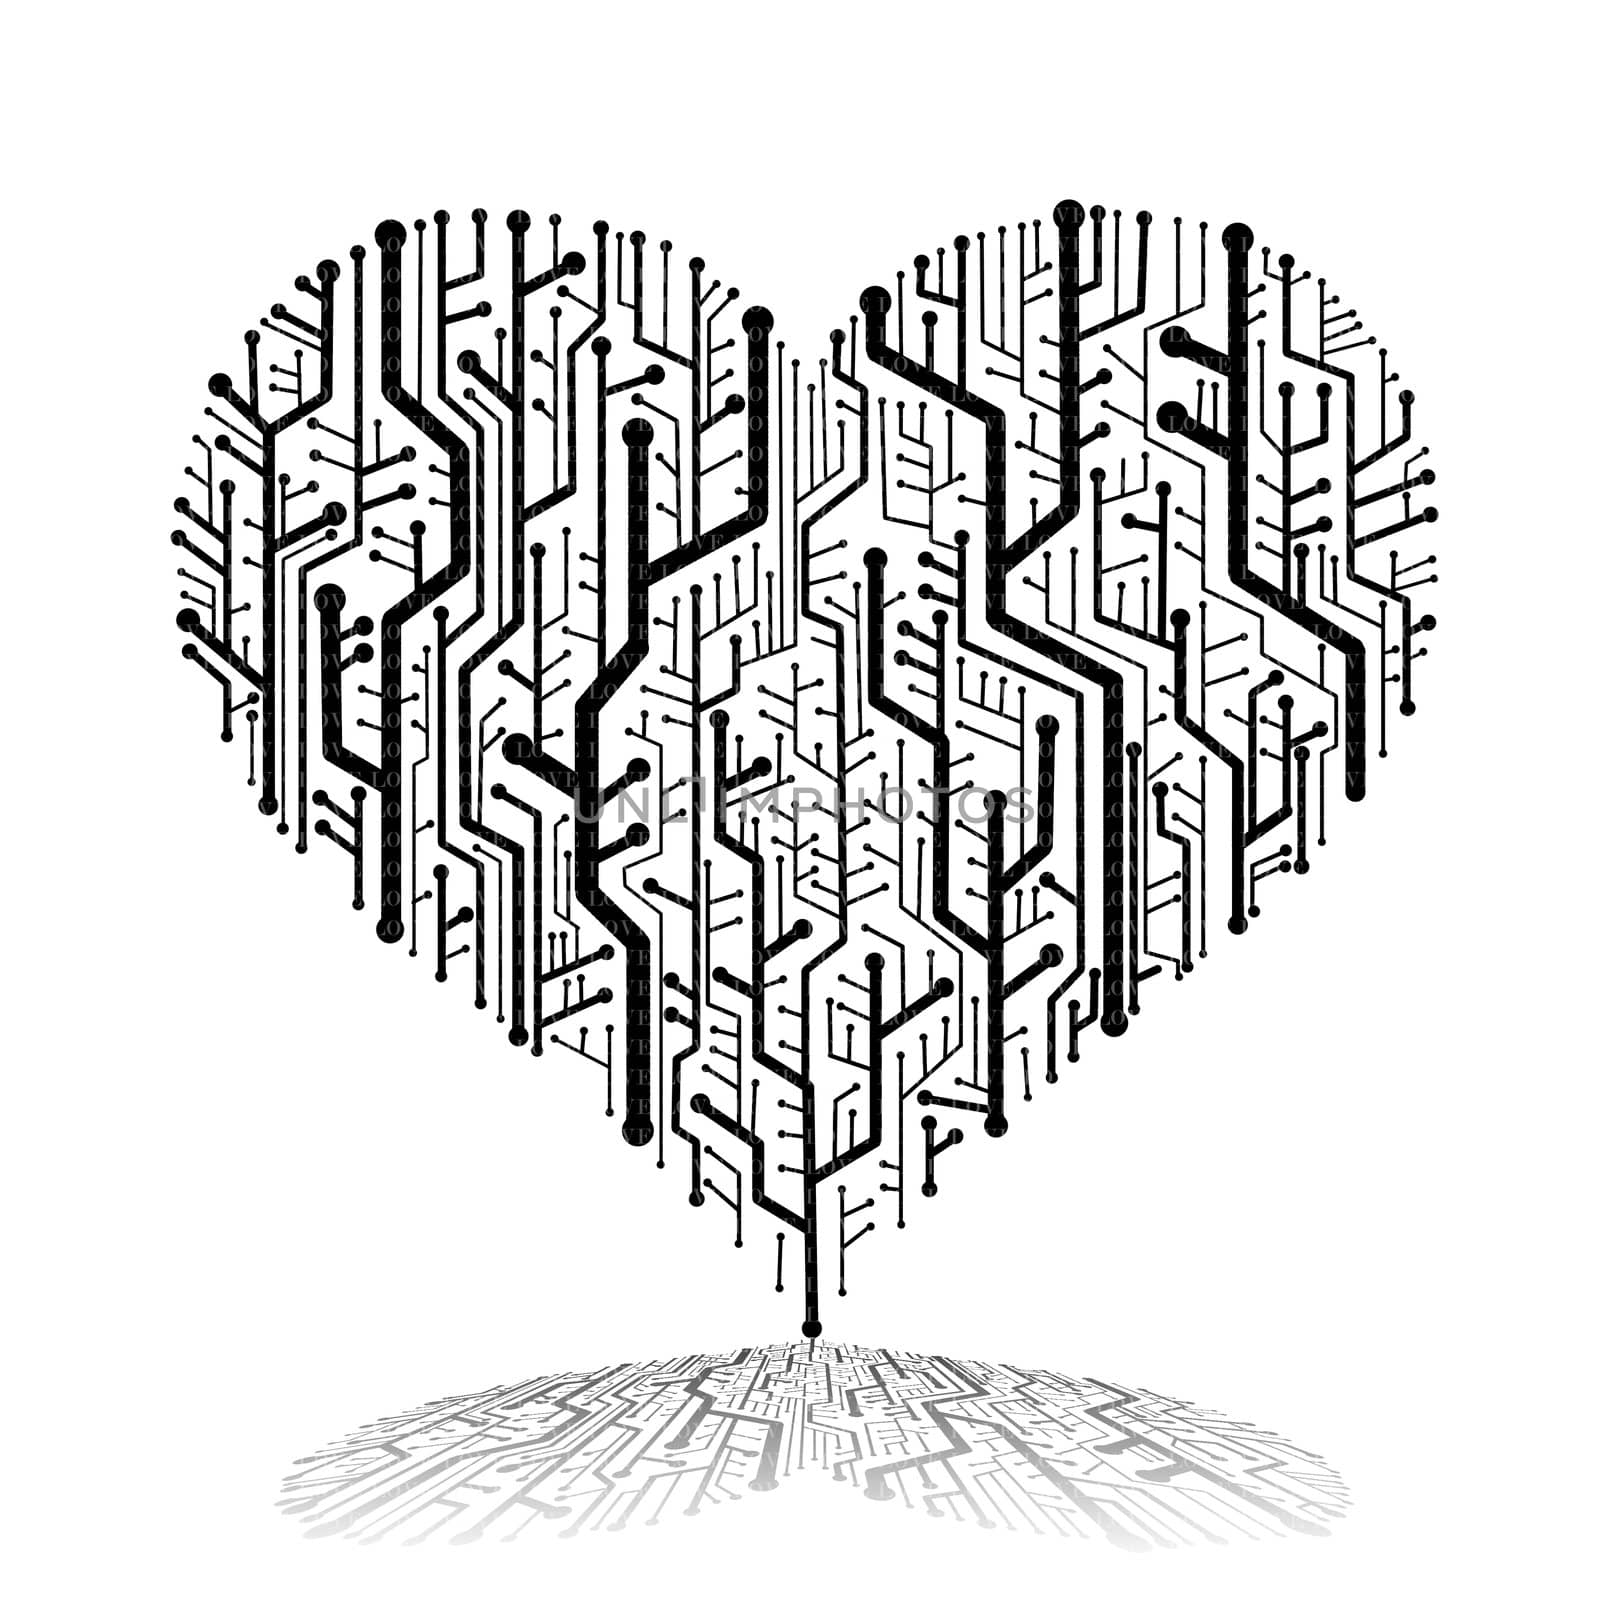 Circuit board in Heart shape with shadow on ground, Technology background 